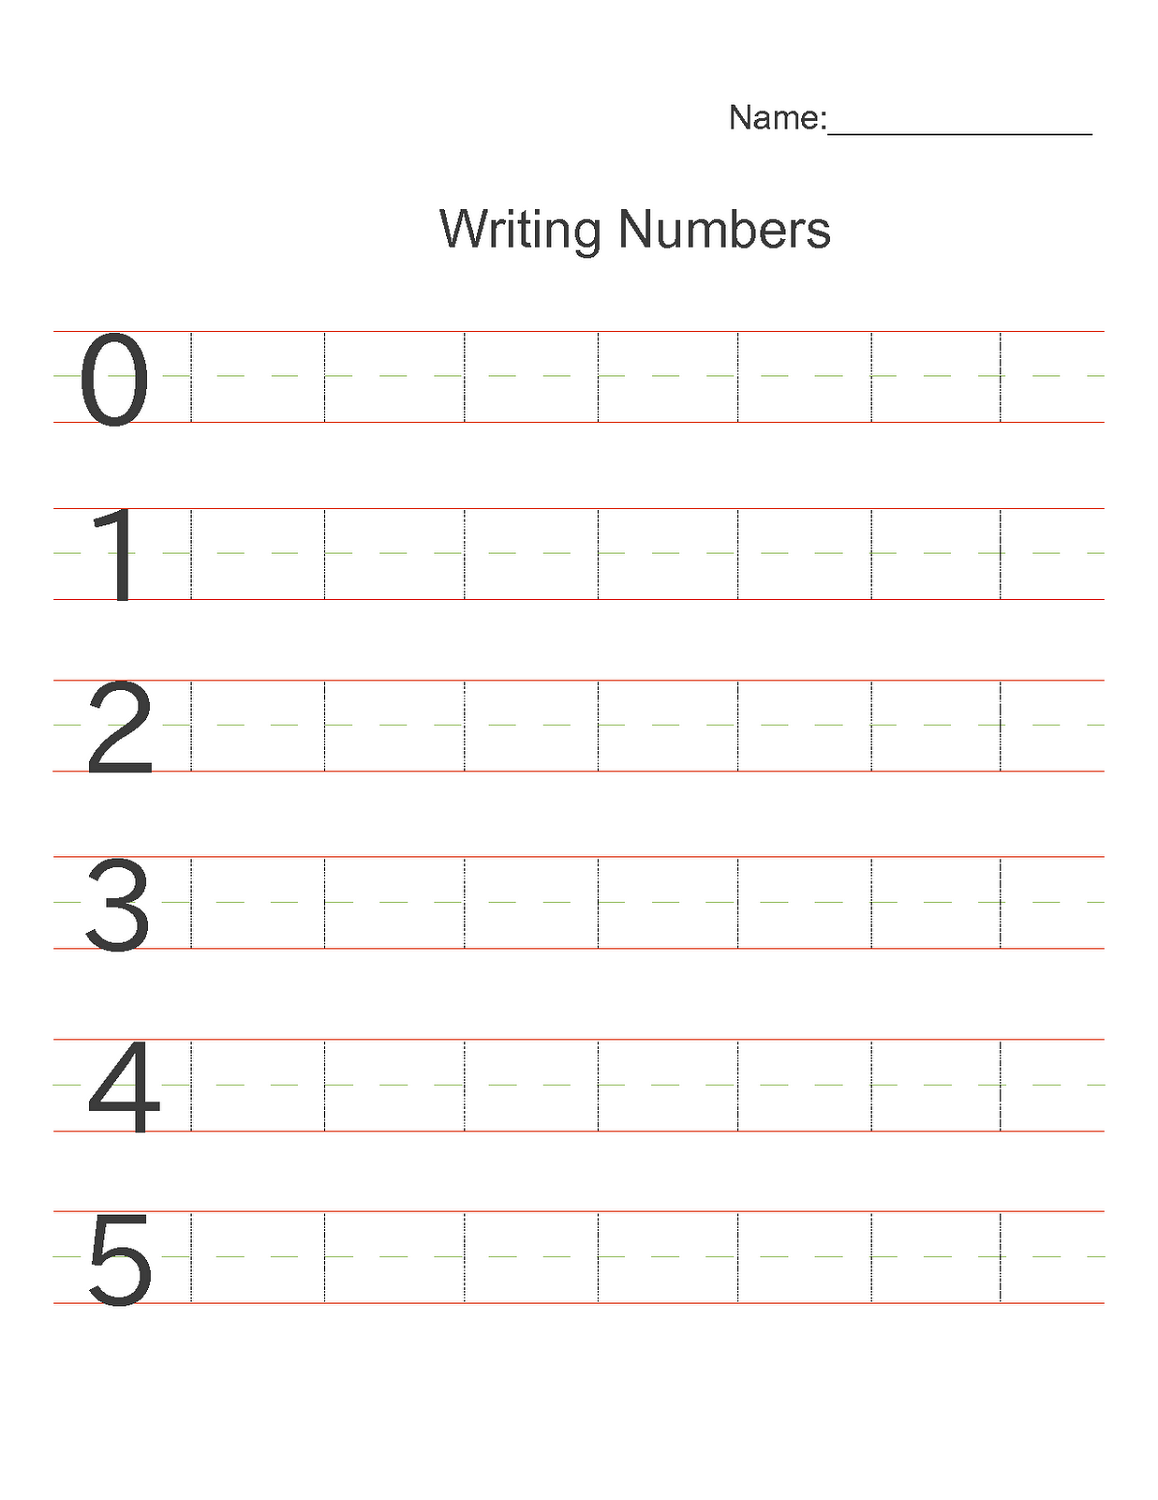 writing-numbers-worksheet-for-kids-101-activity